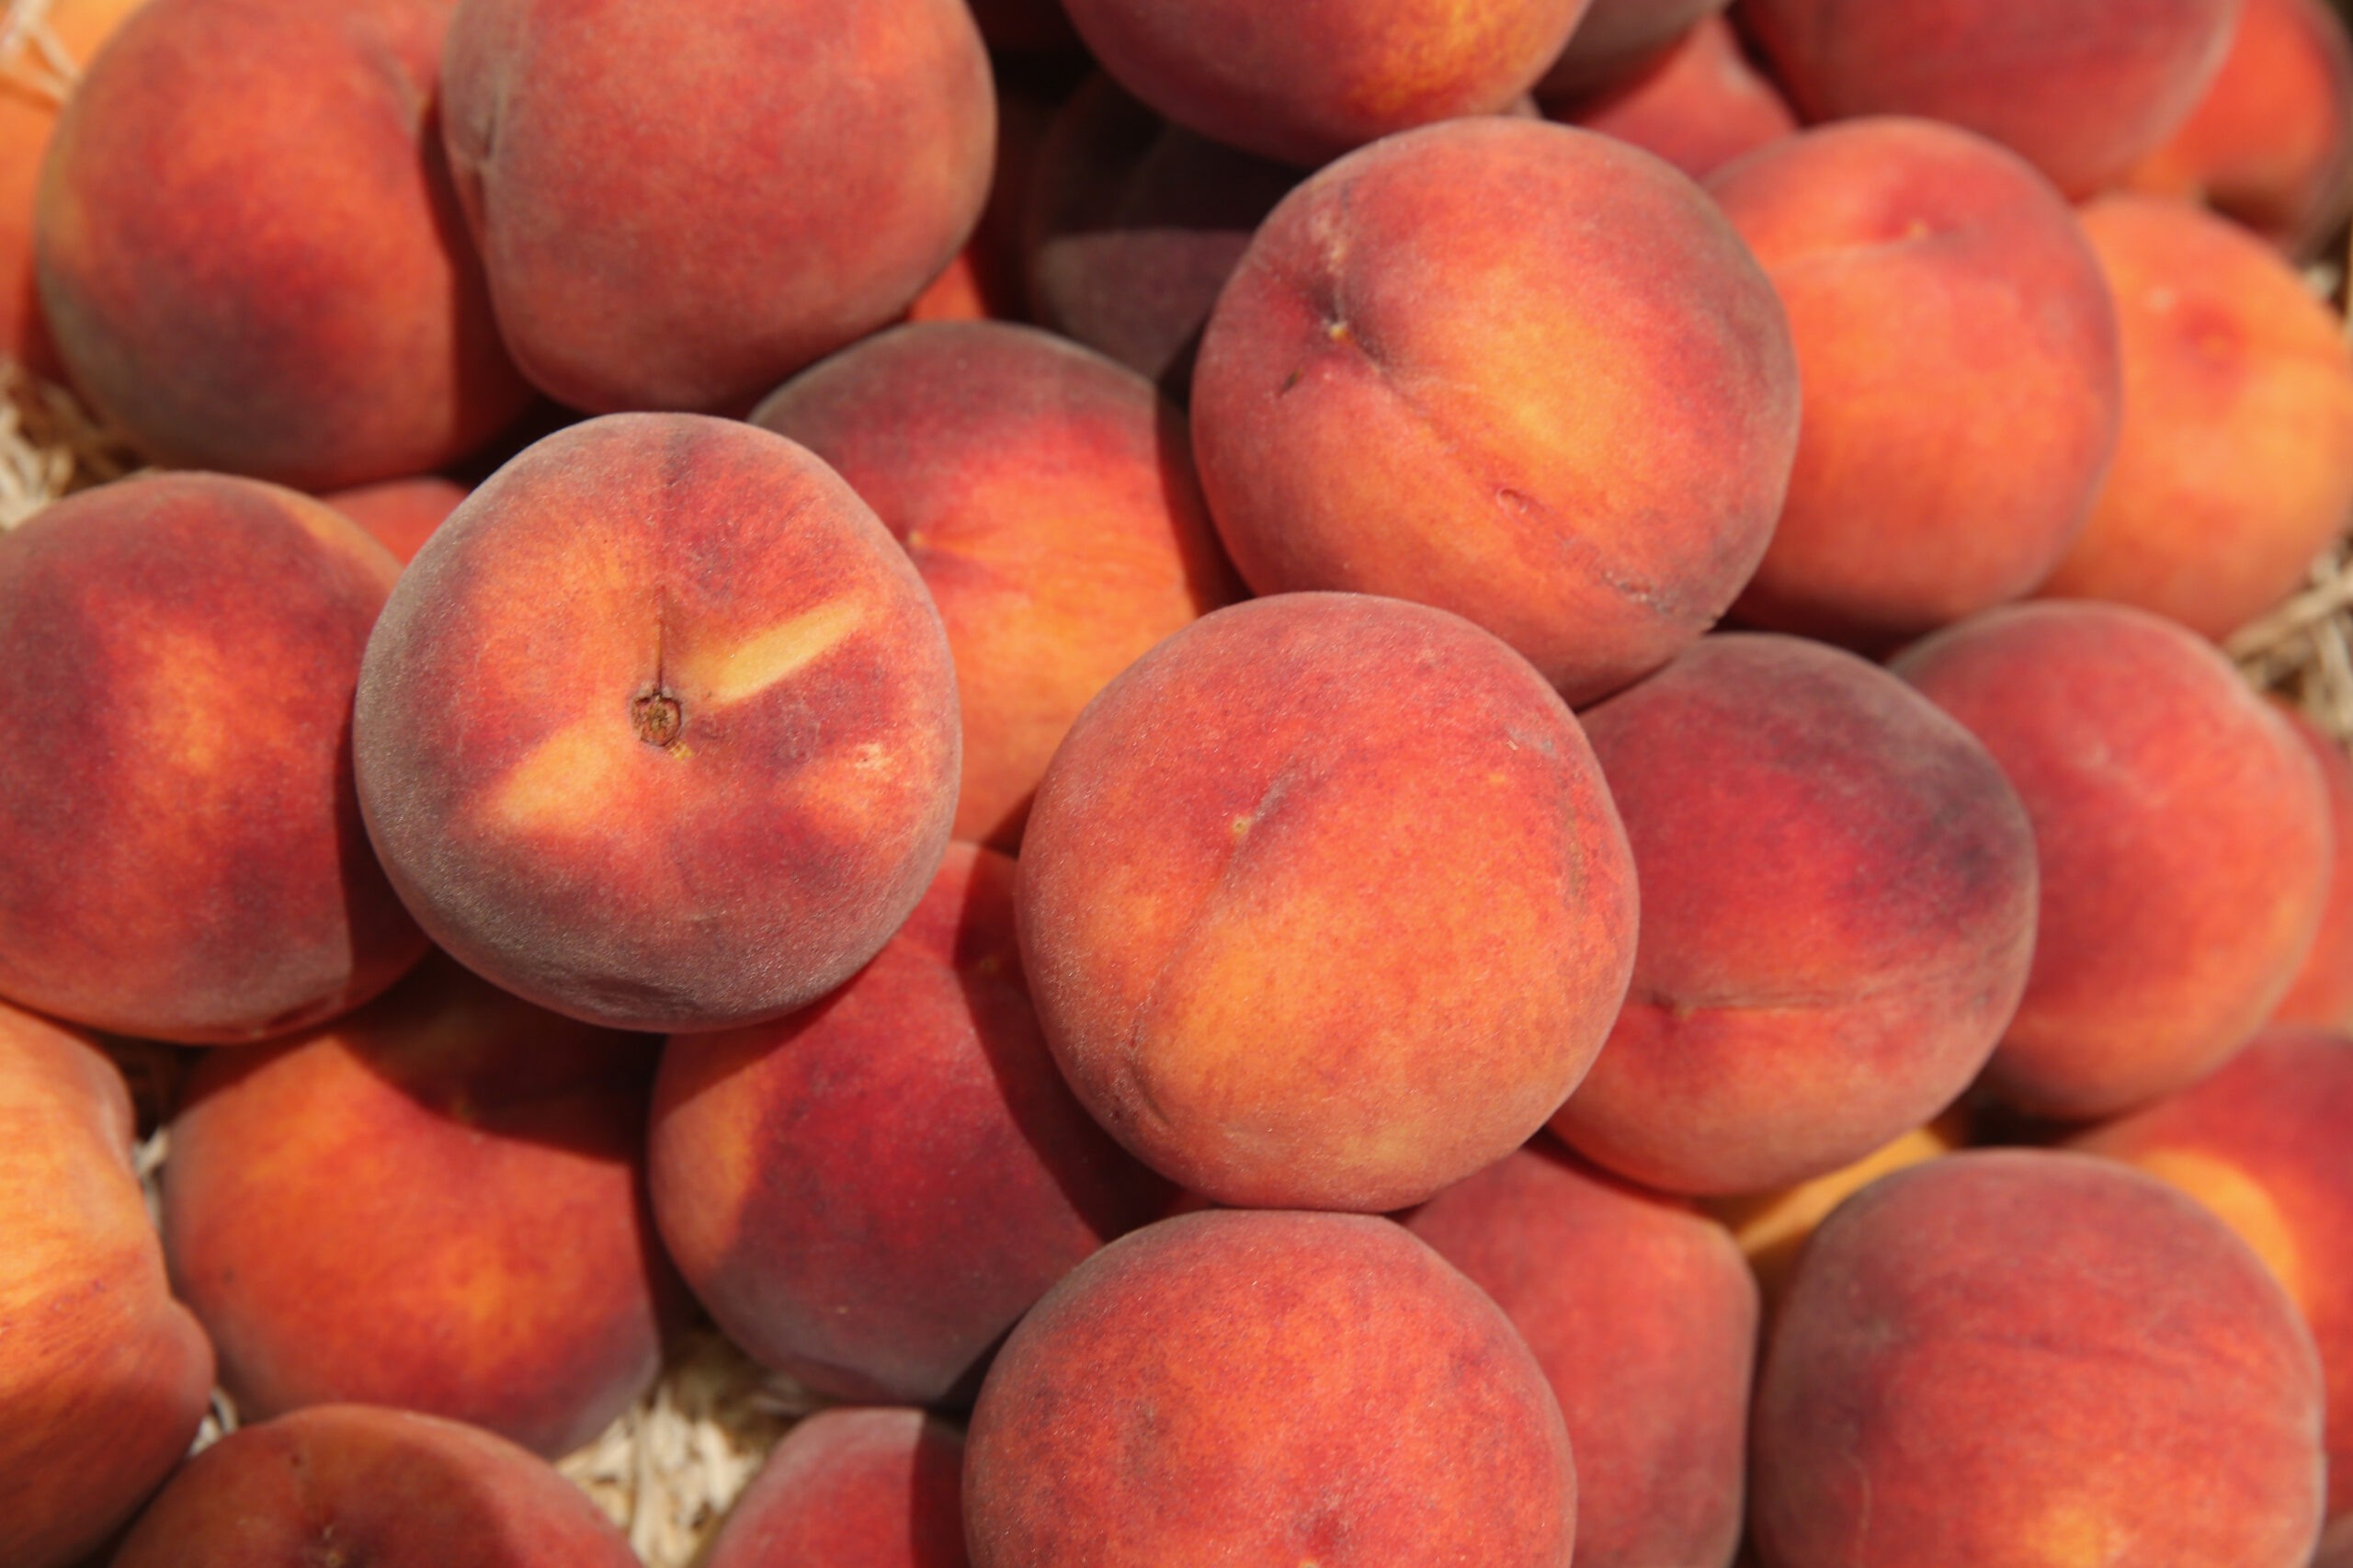 The FDA Says Some Peaches May Be Linked To A Salmonella Outbreak. Here’s What We Know.